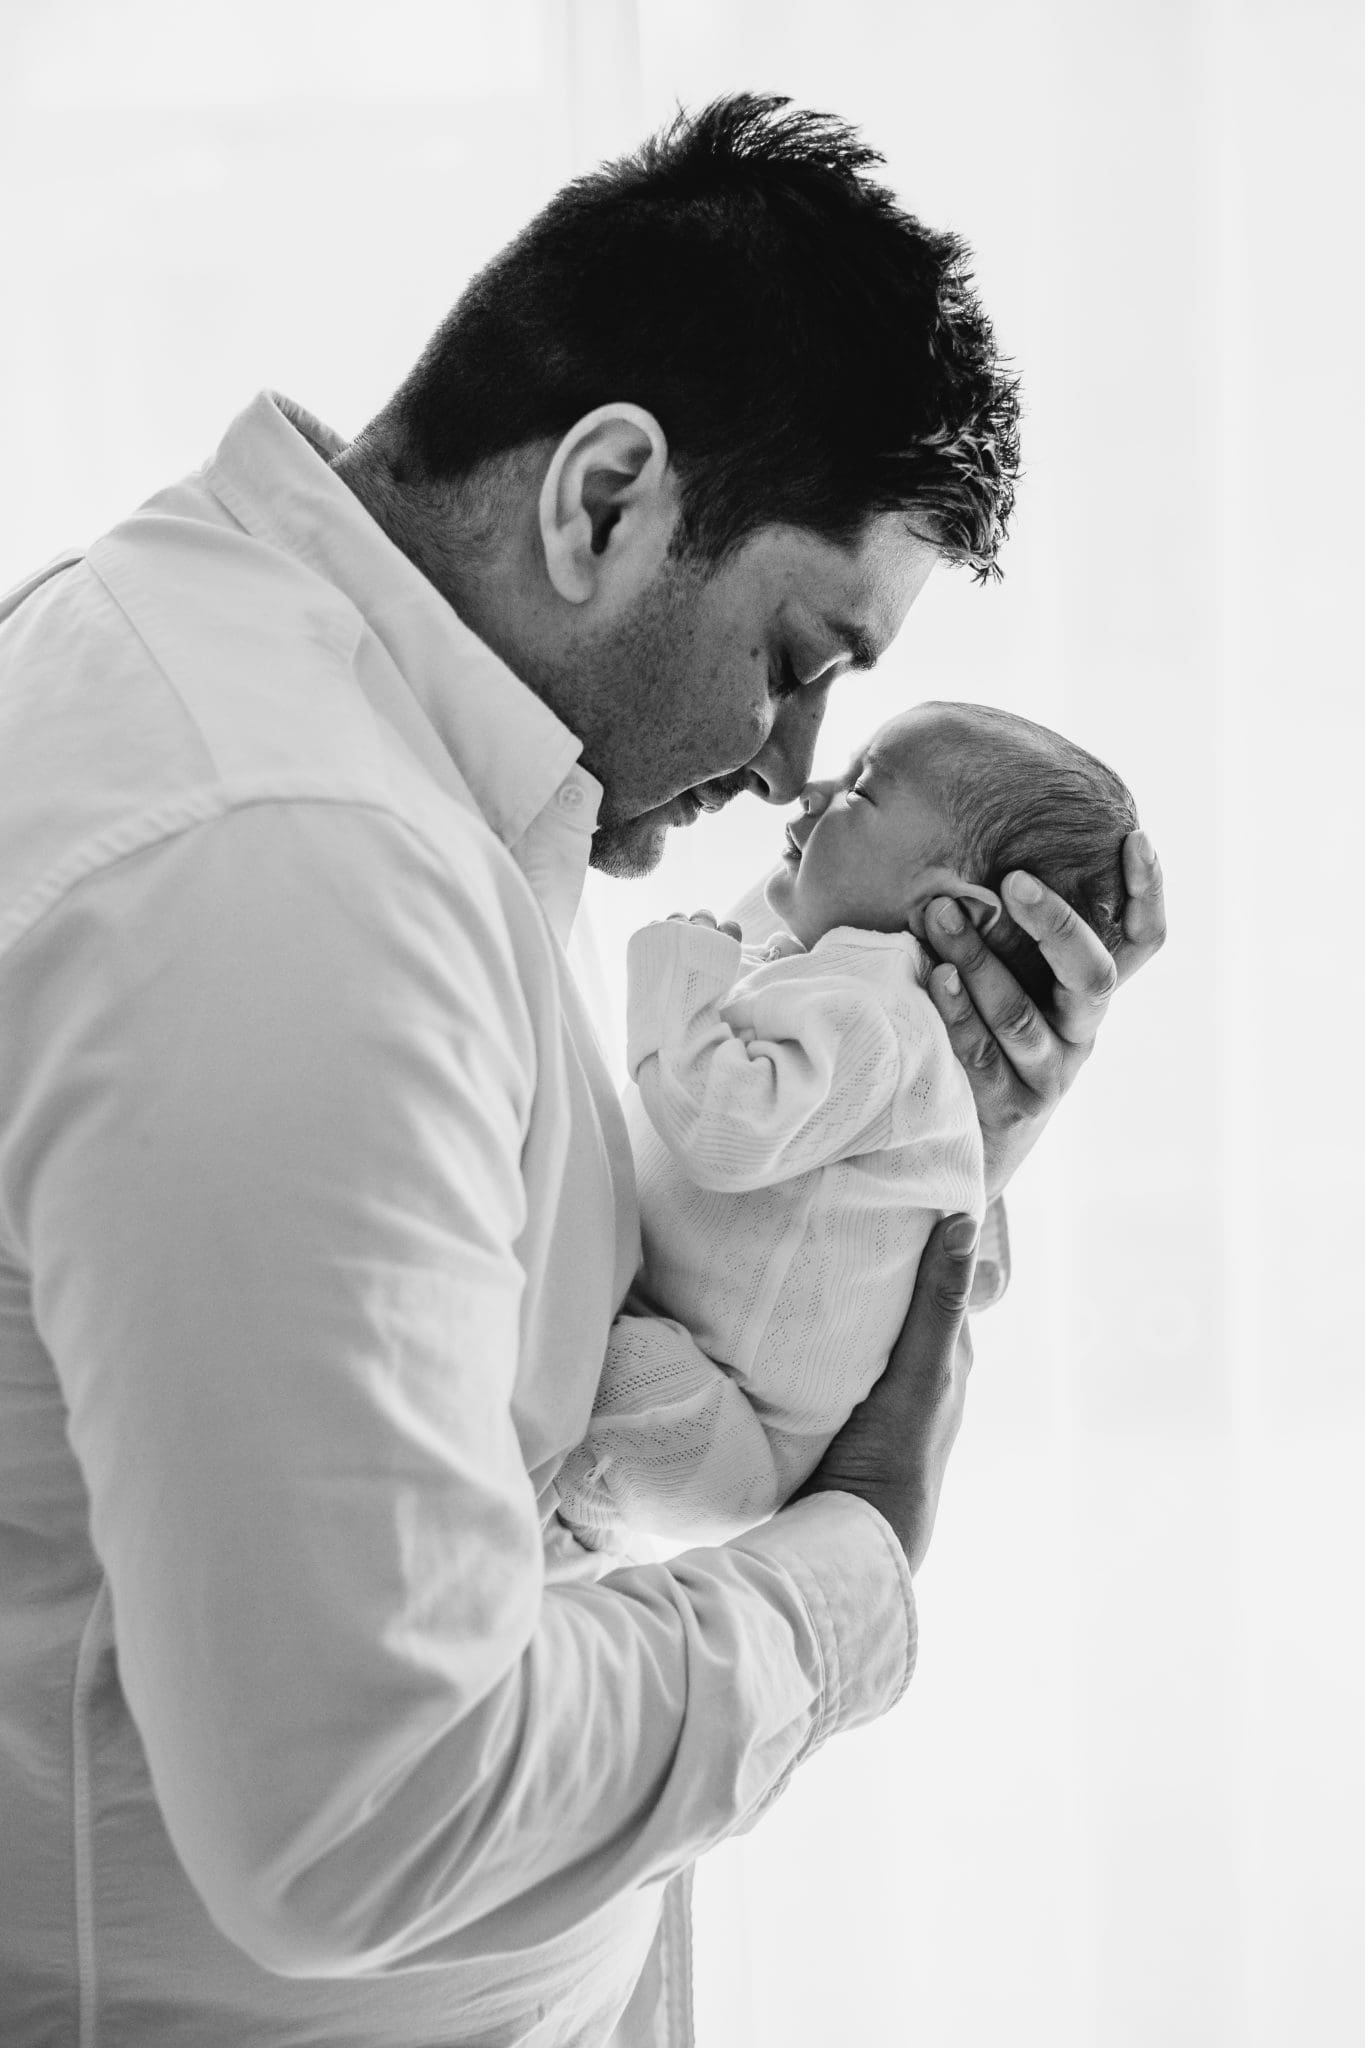 A father presses his nose gently against his newborn baby's face in front of a bright window